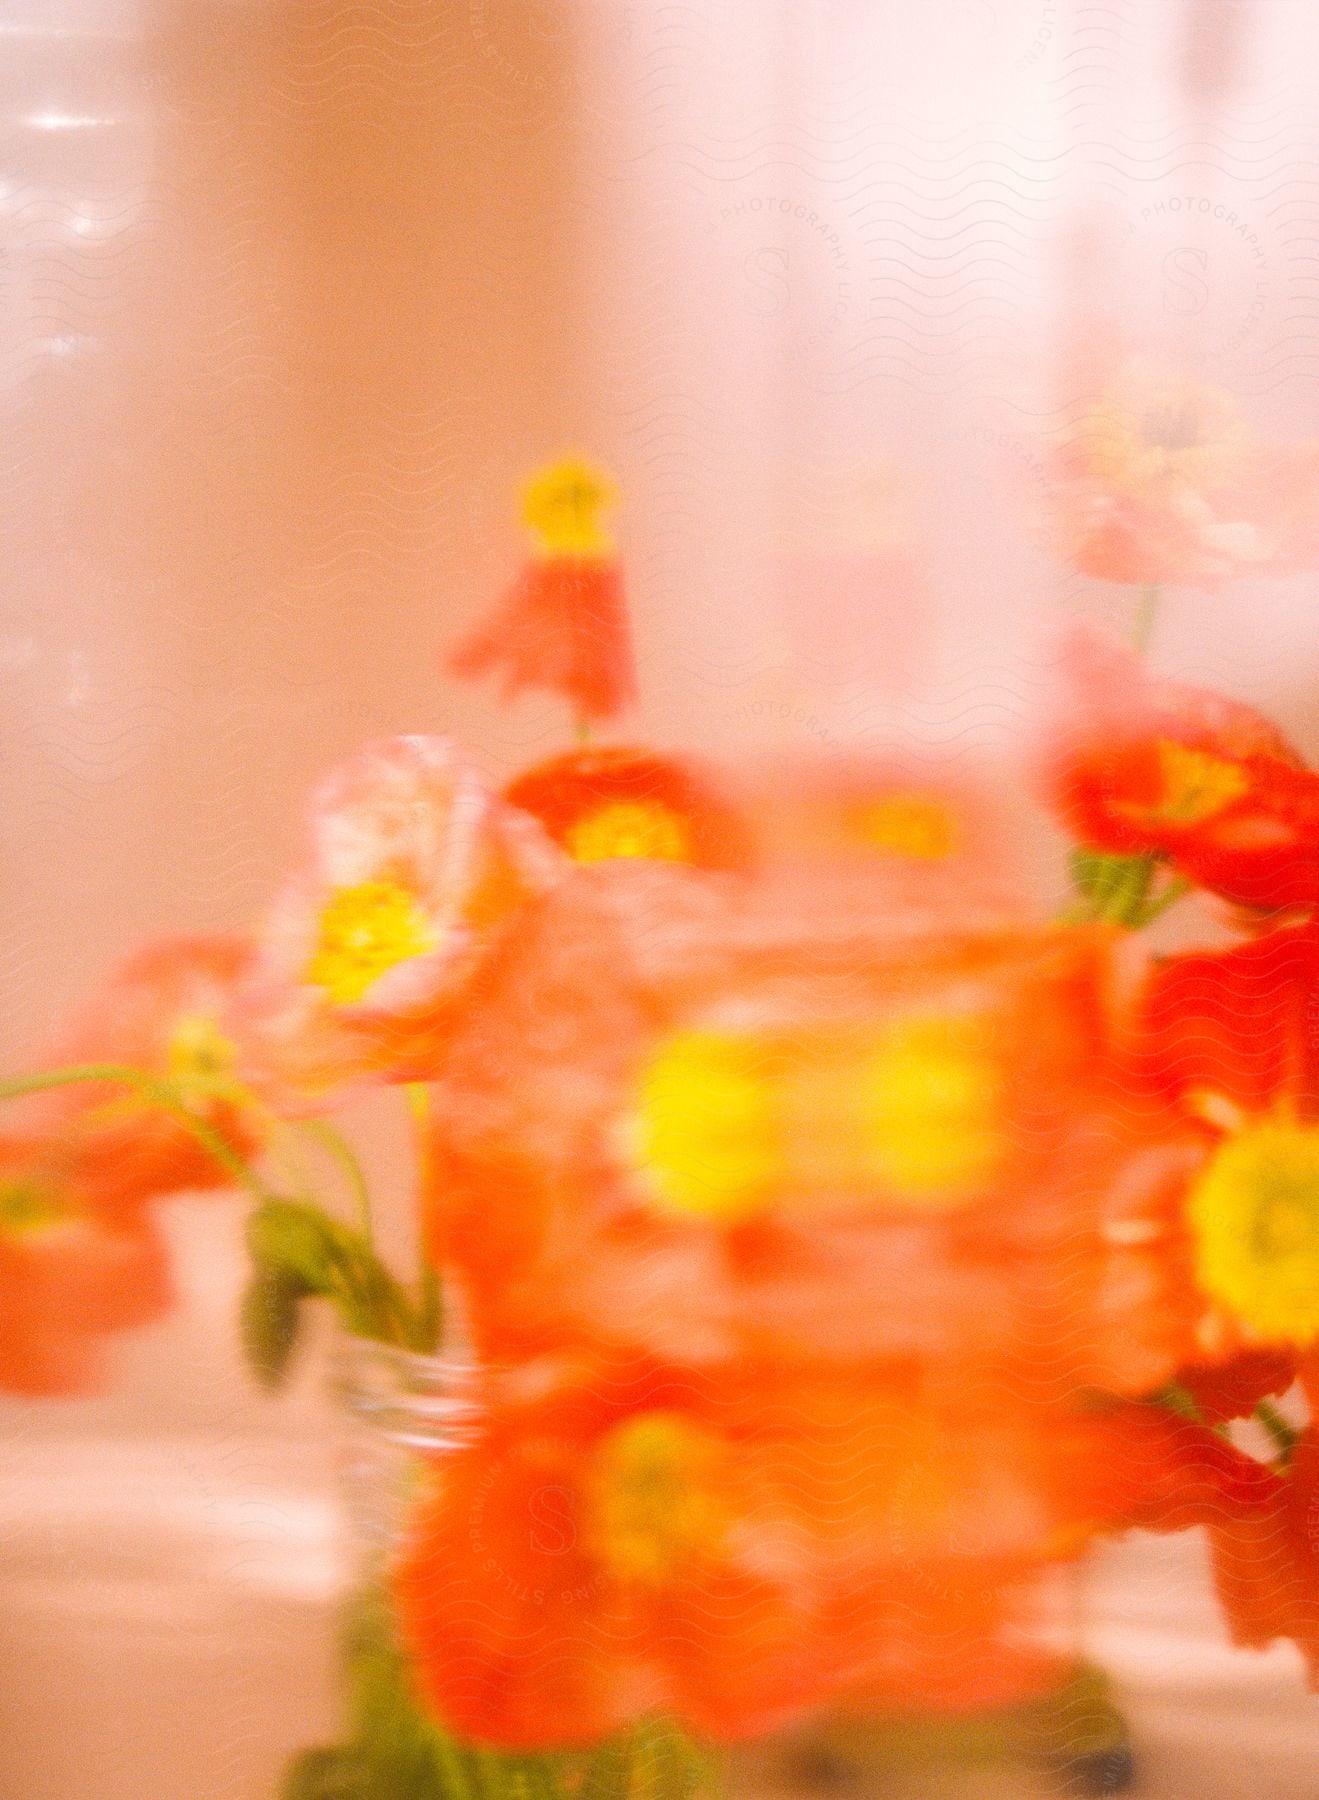 Blurry red flowers with yellow centers in a glass container.